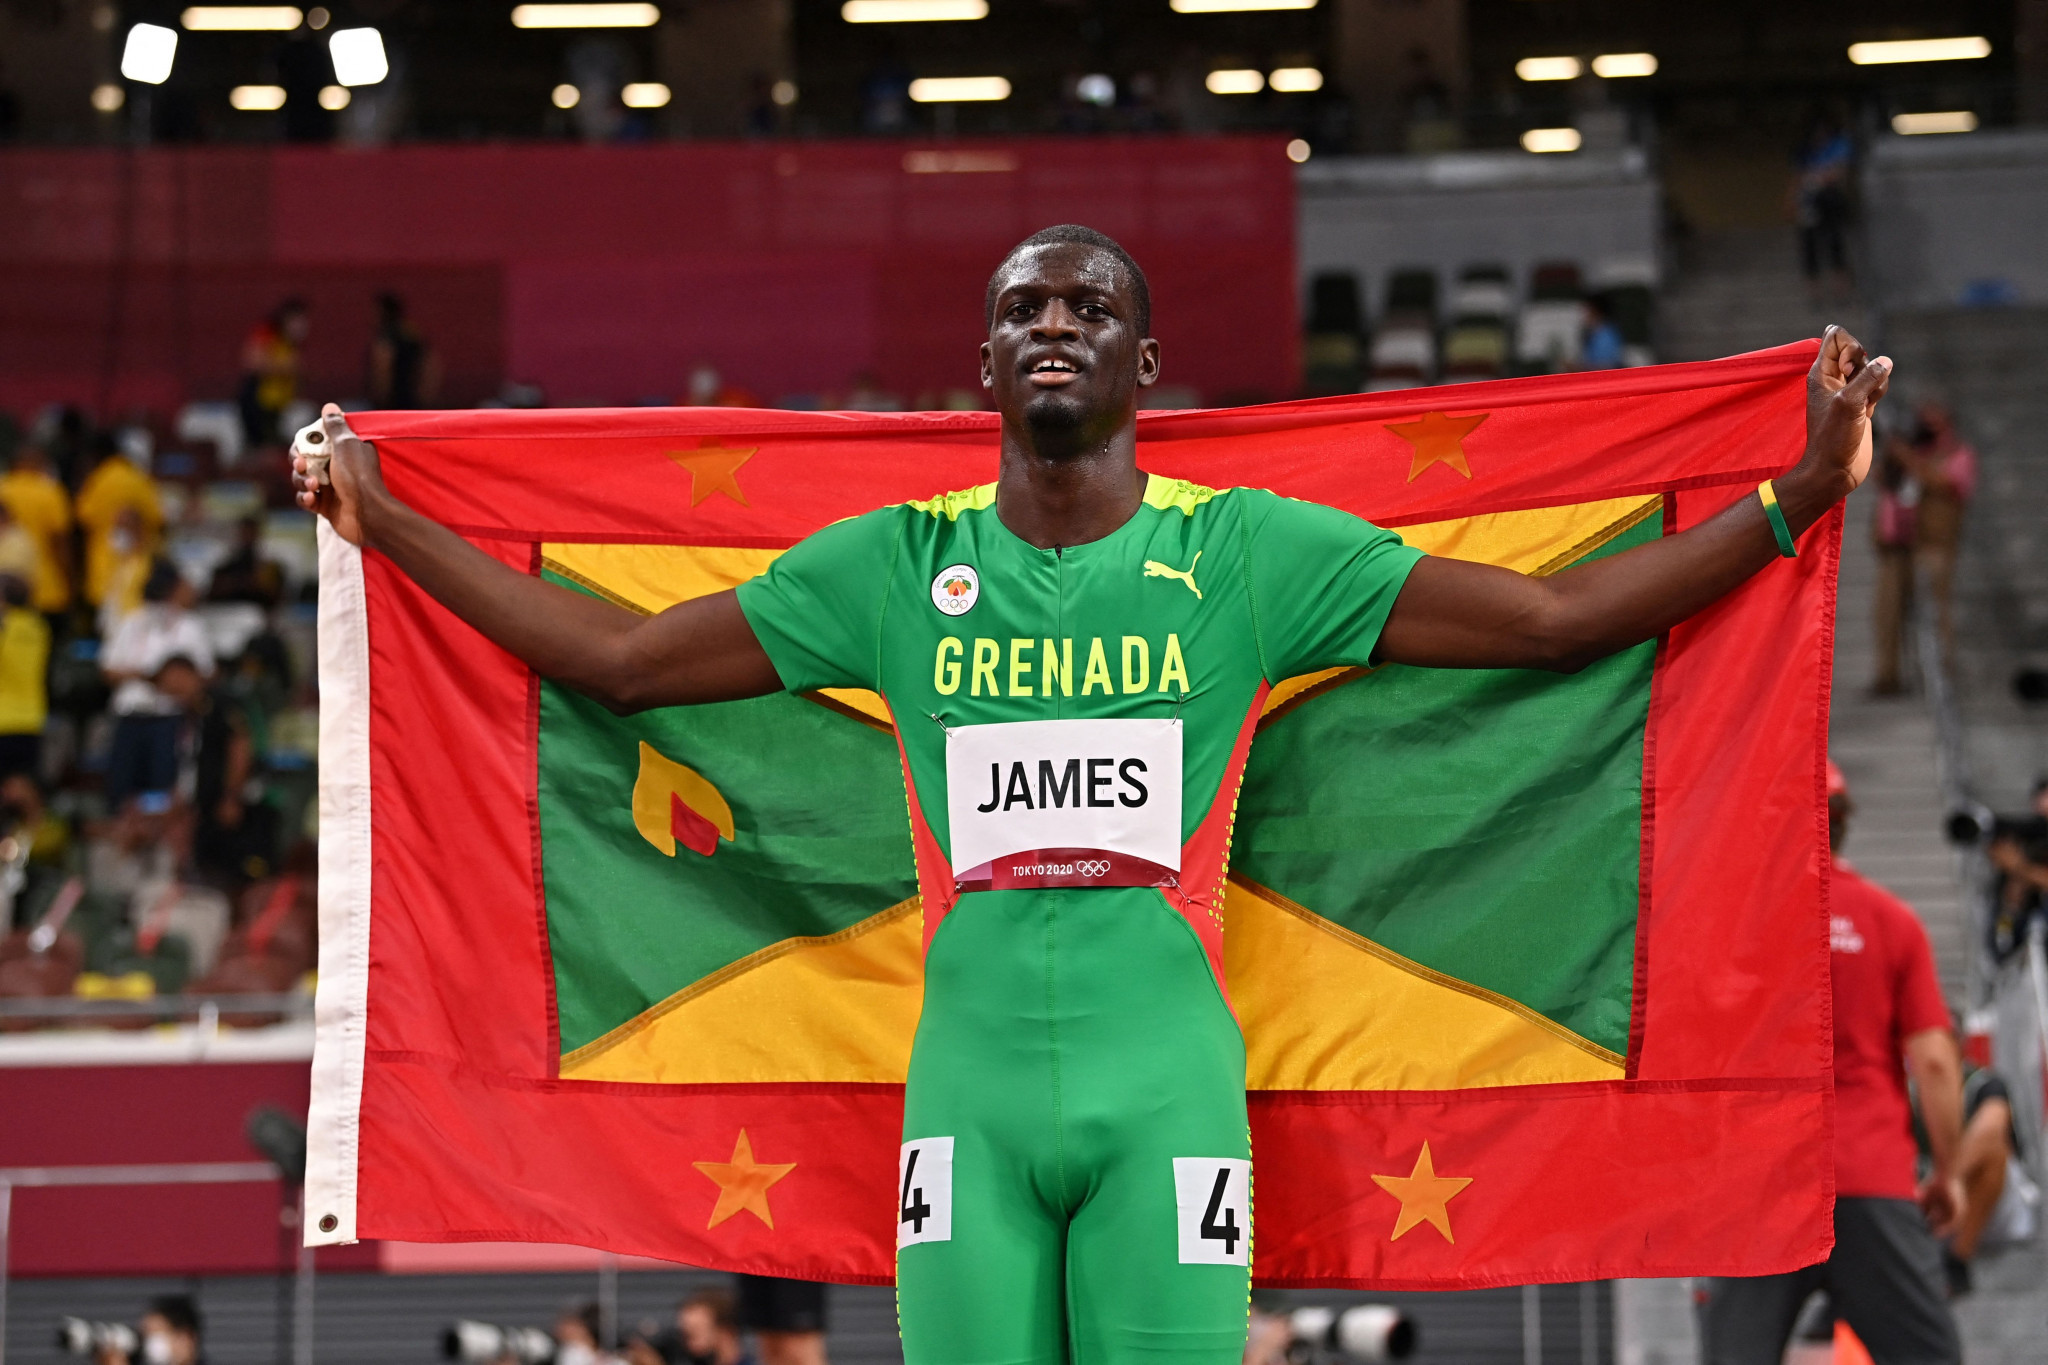 Kirani James has won all three of Grenada's Olympic medals ©Getty Images